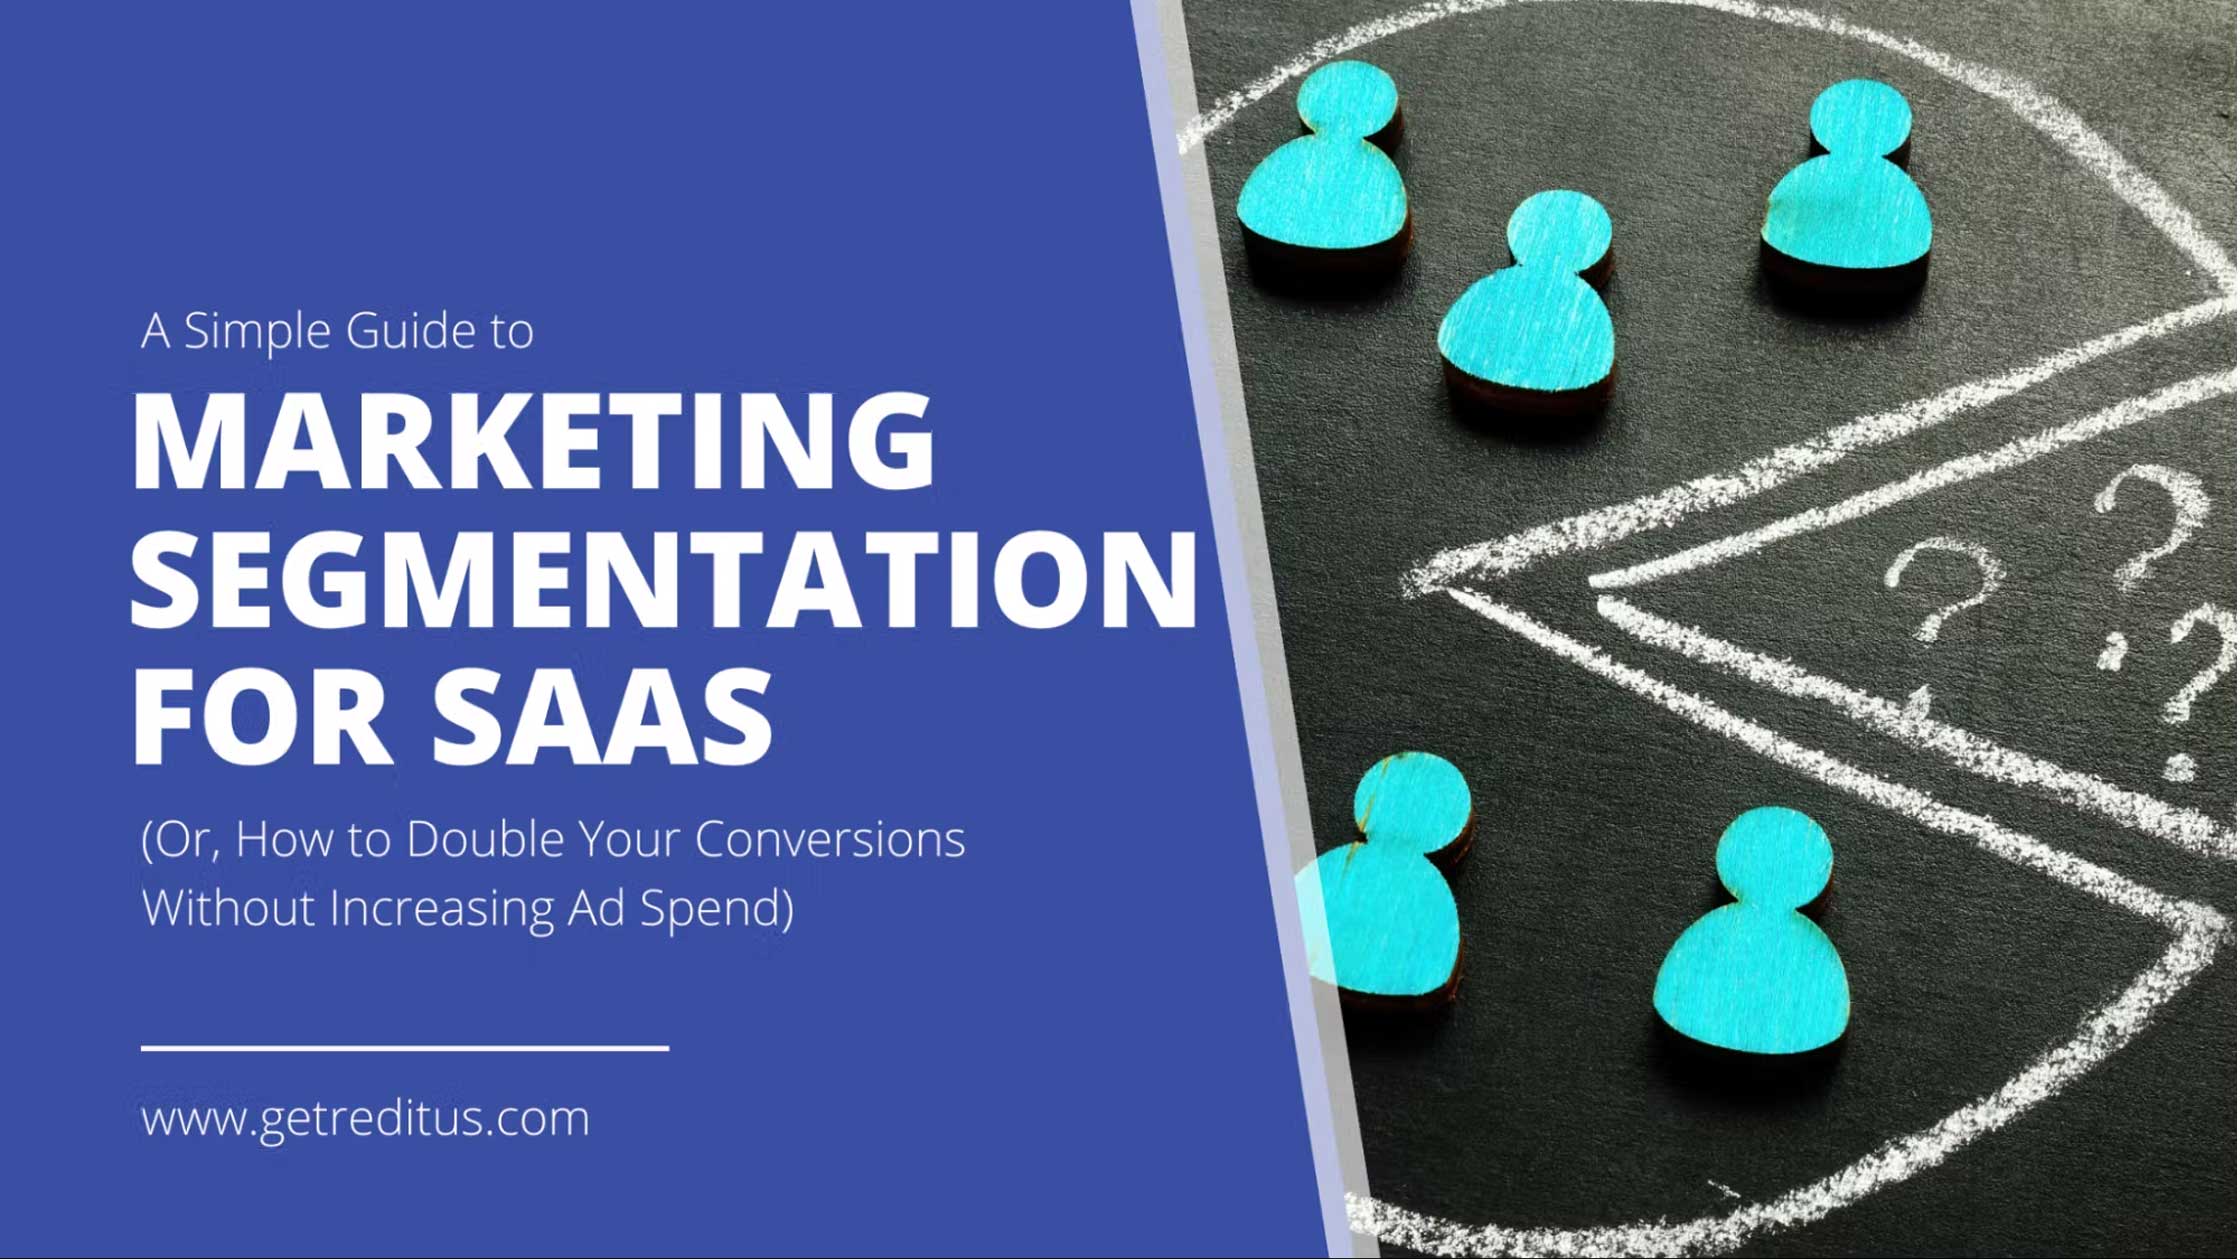 How to Double Your Conversions B2B marketing segmentation